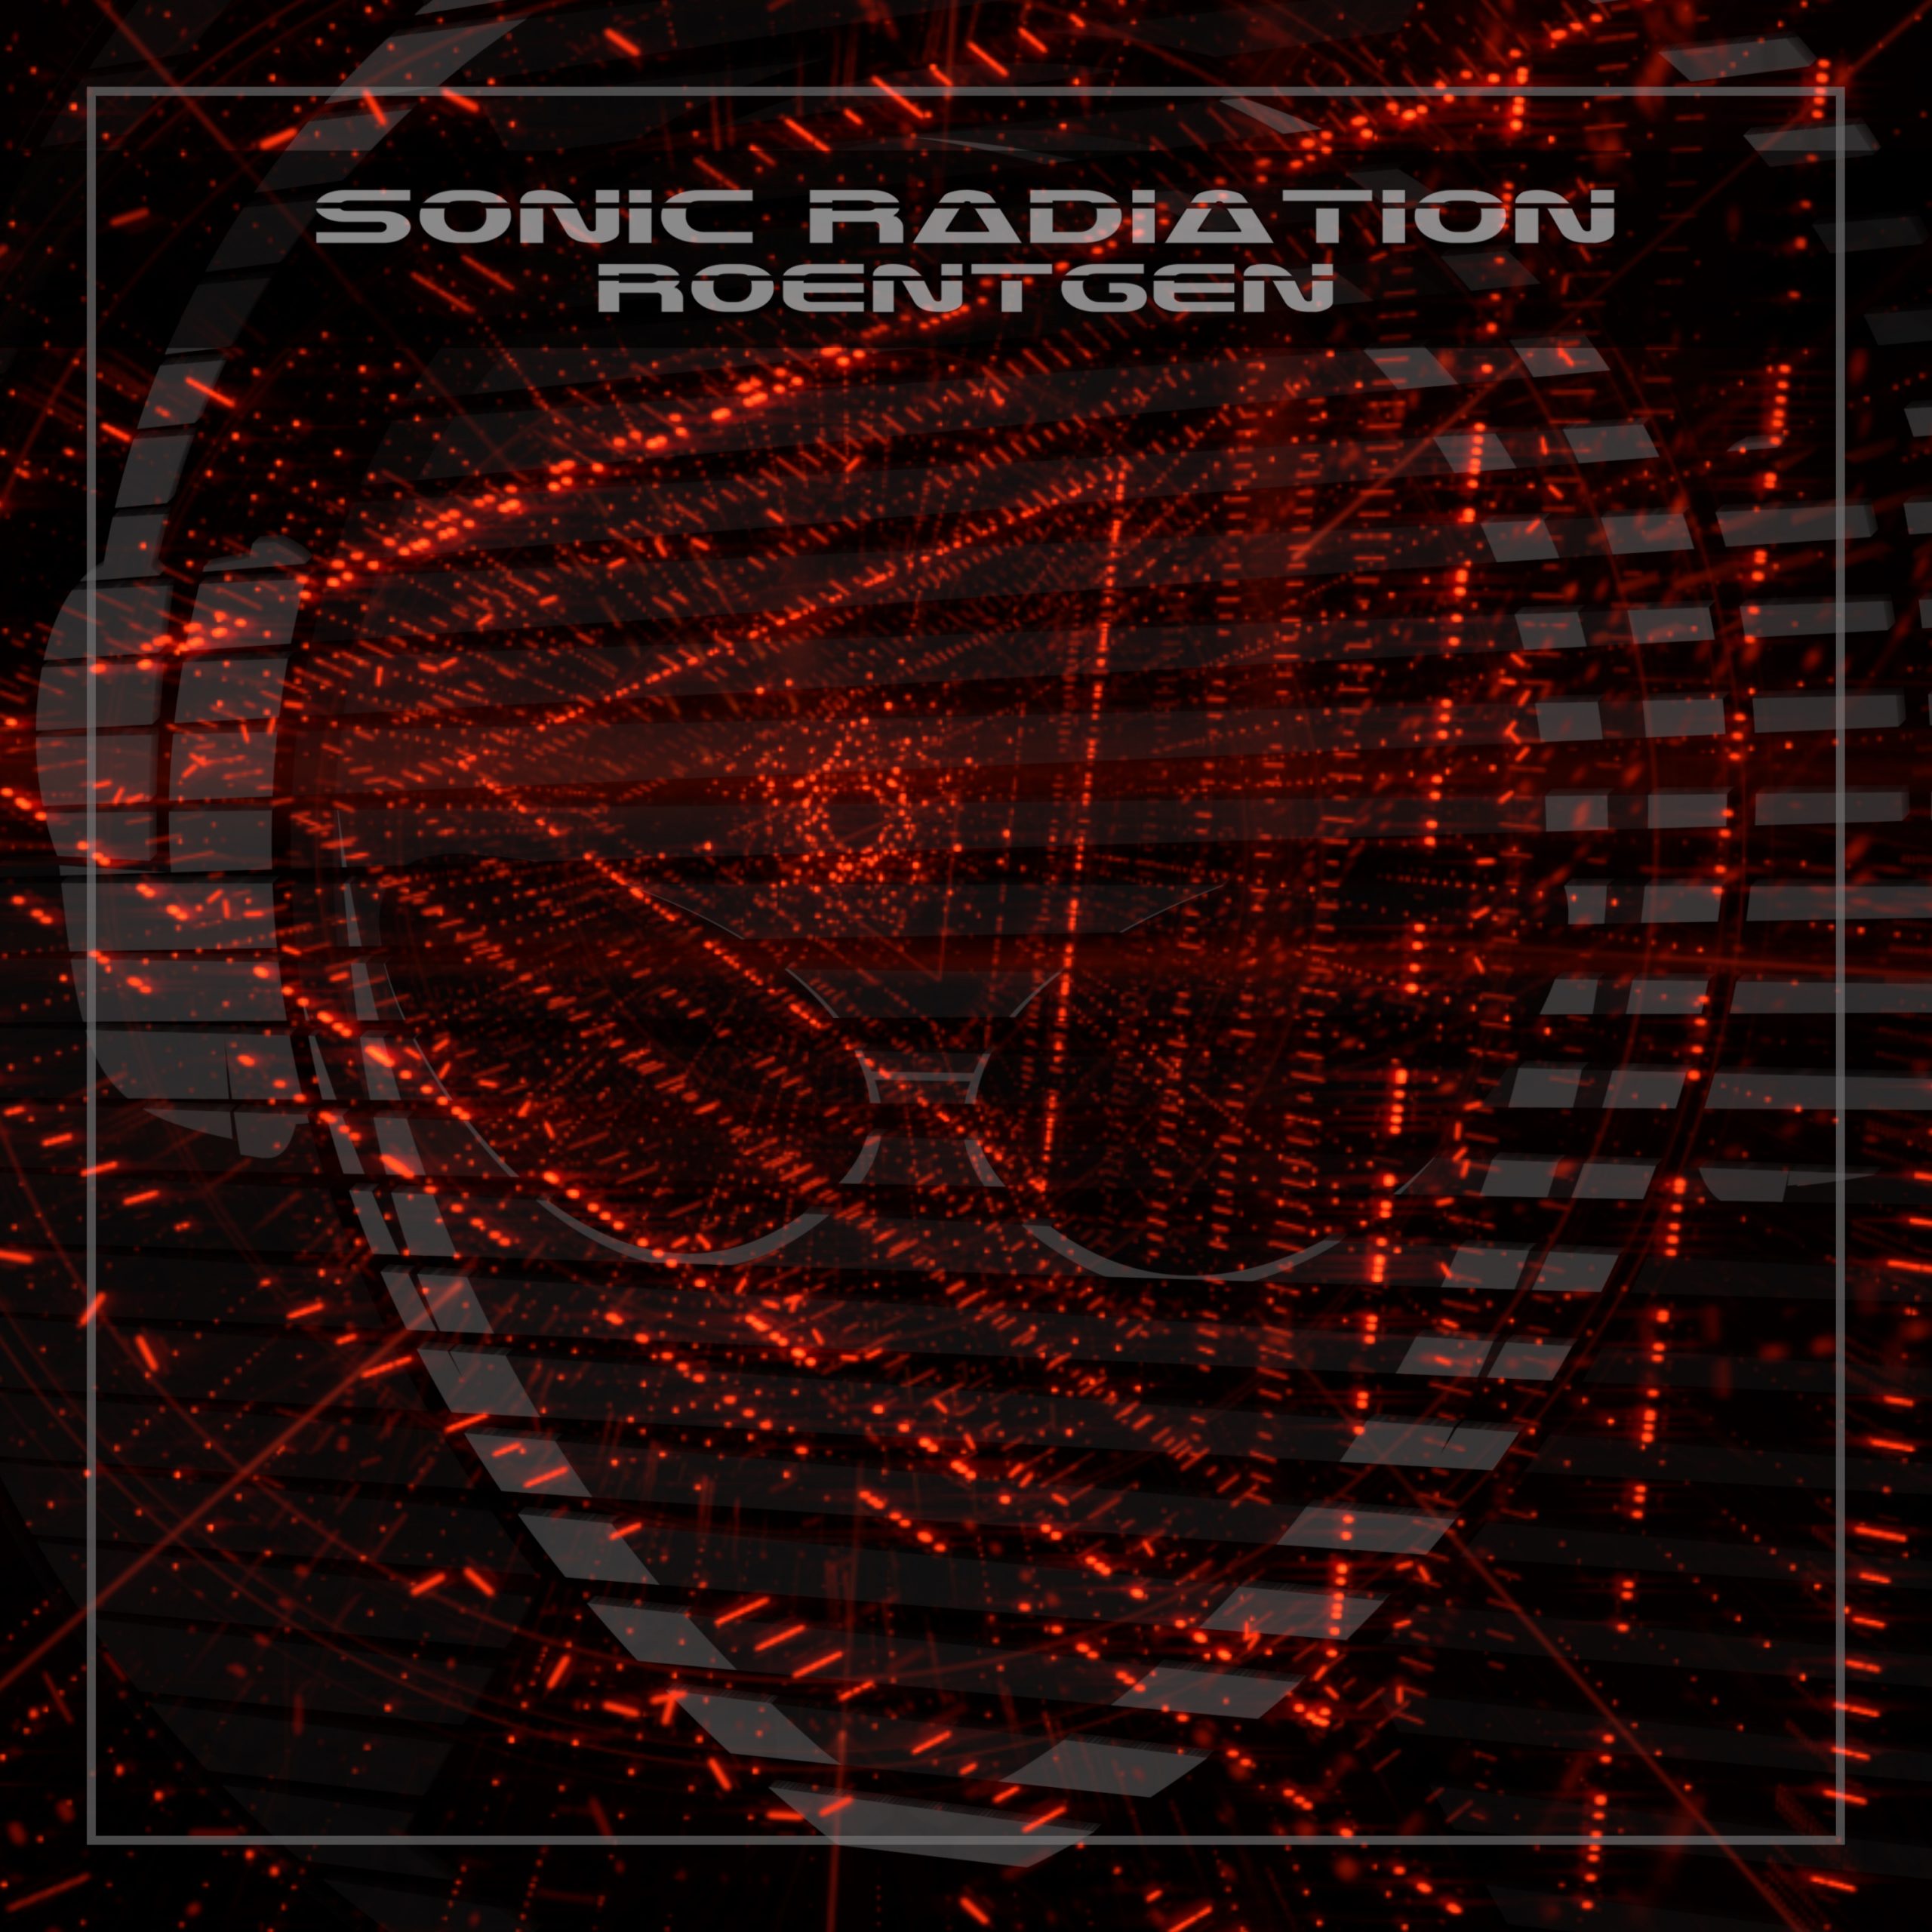 EDM PREMIERES: Sonic and Sleek with a Blast of ‘Star Wars’ energy, The future is now as ‘Sonic Radiation’ leaks new single ‘Roentgen’